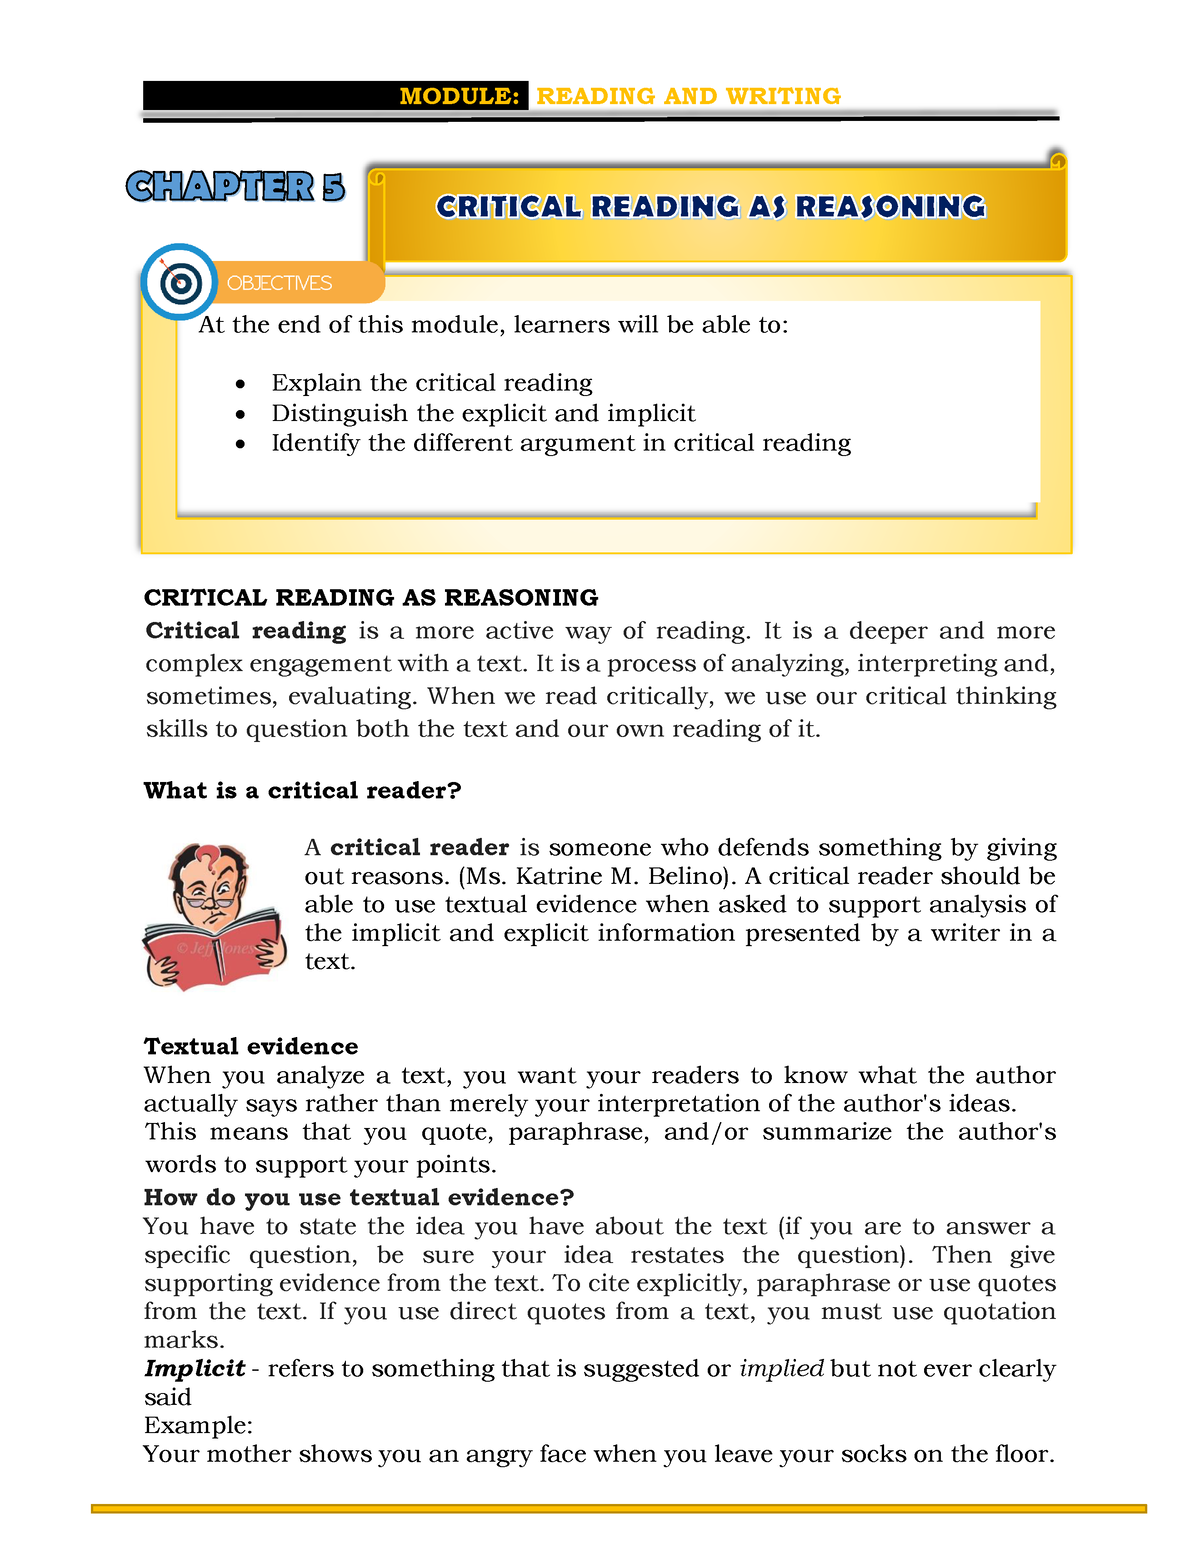 how will you differentiate critical reading from critical thinking brainly